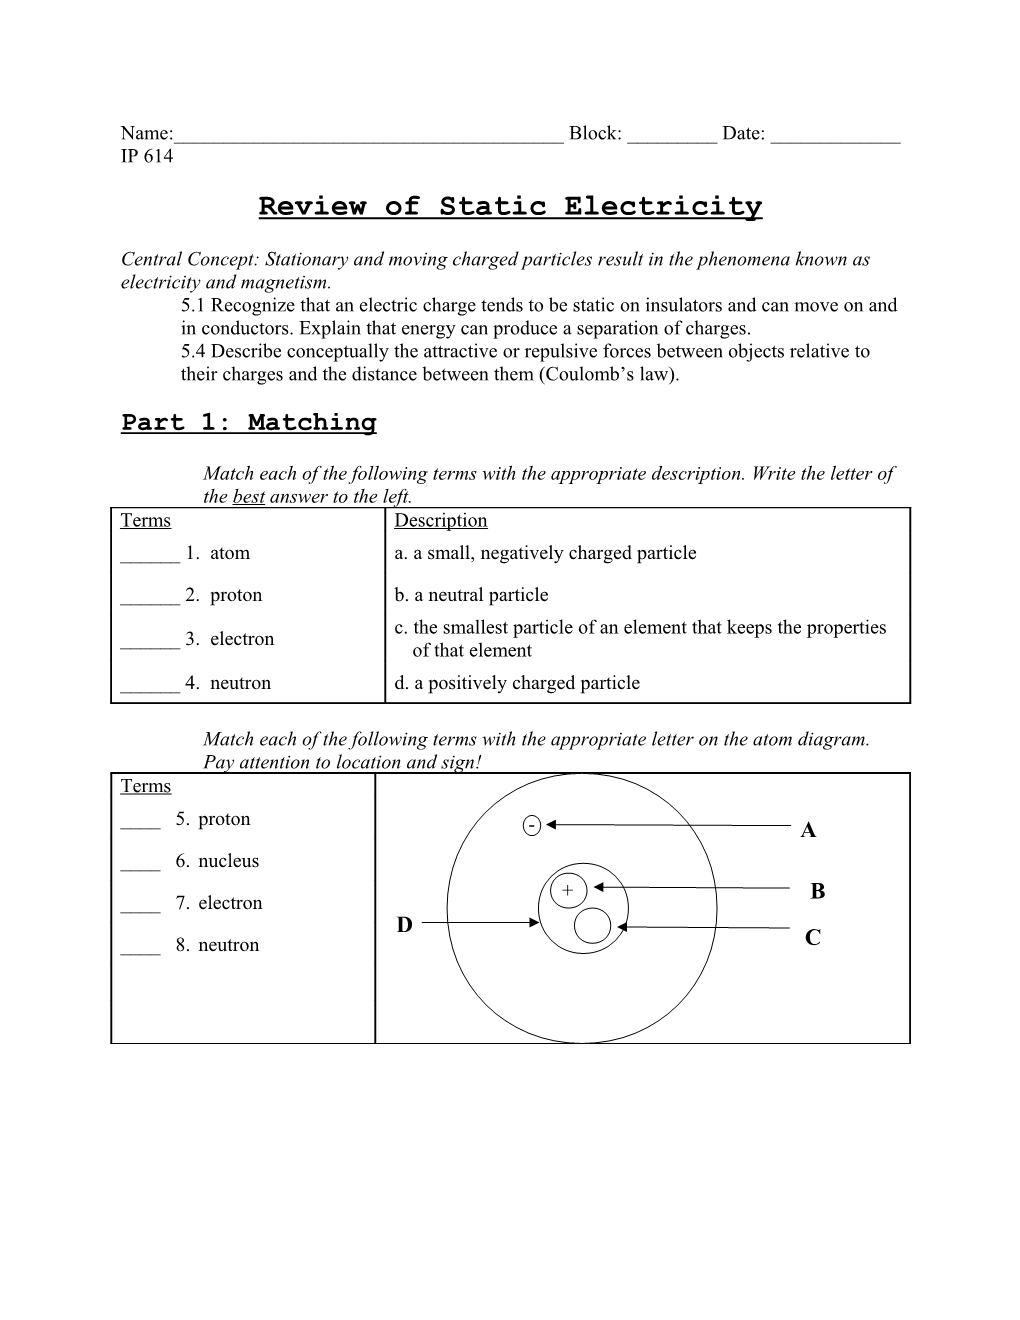 Review of Static Electricity